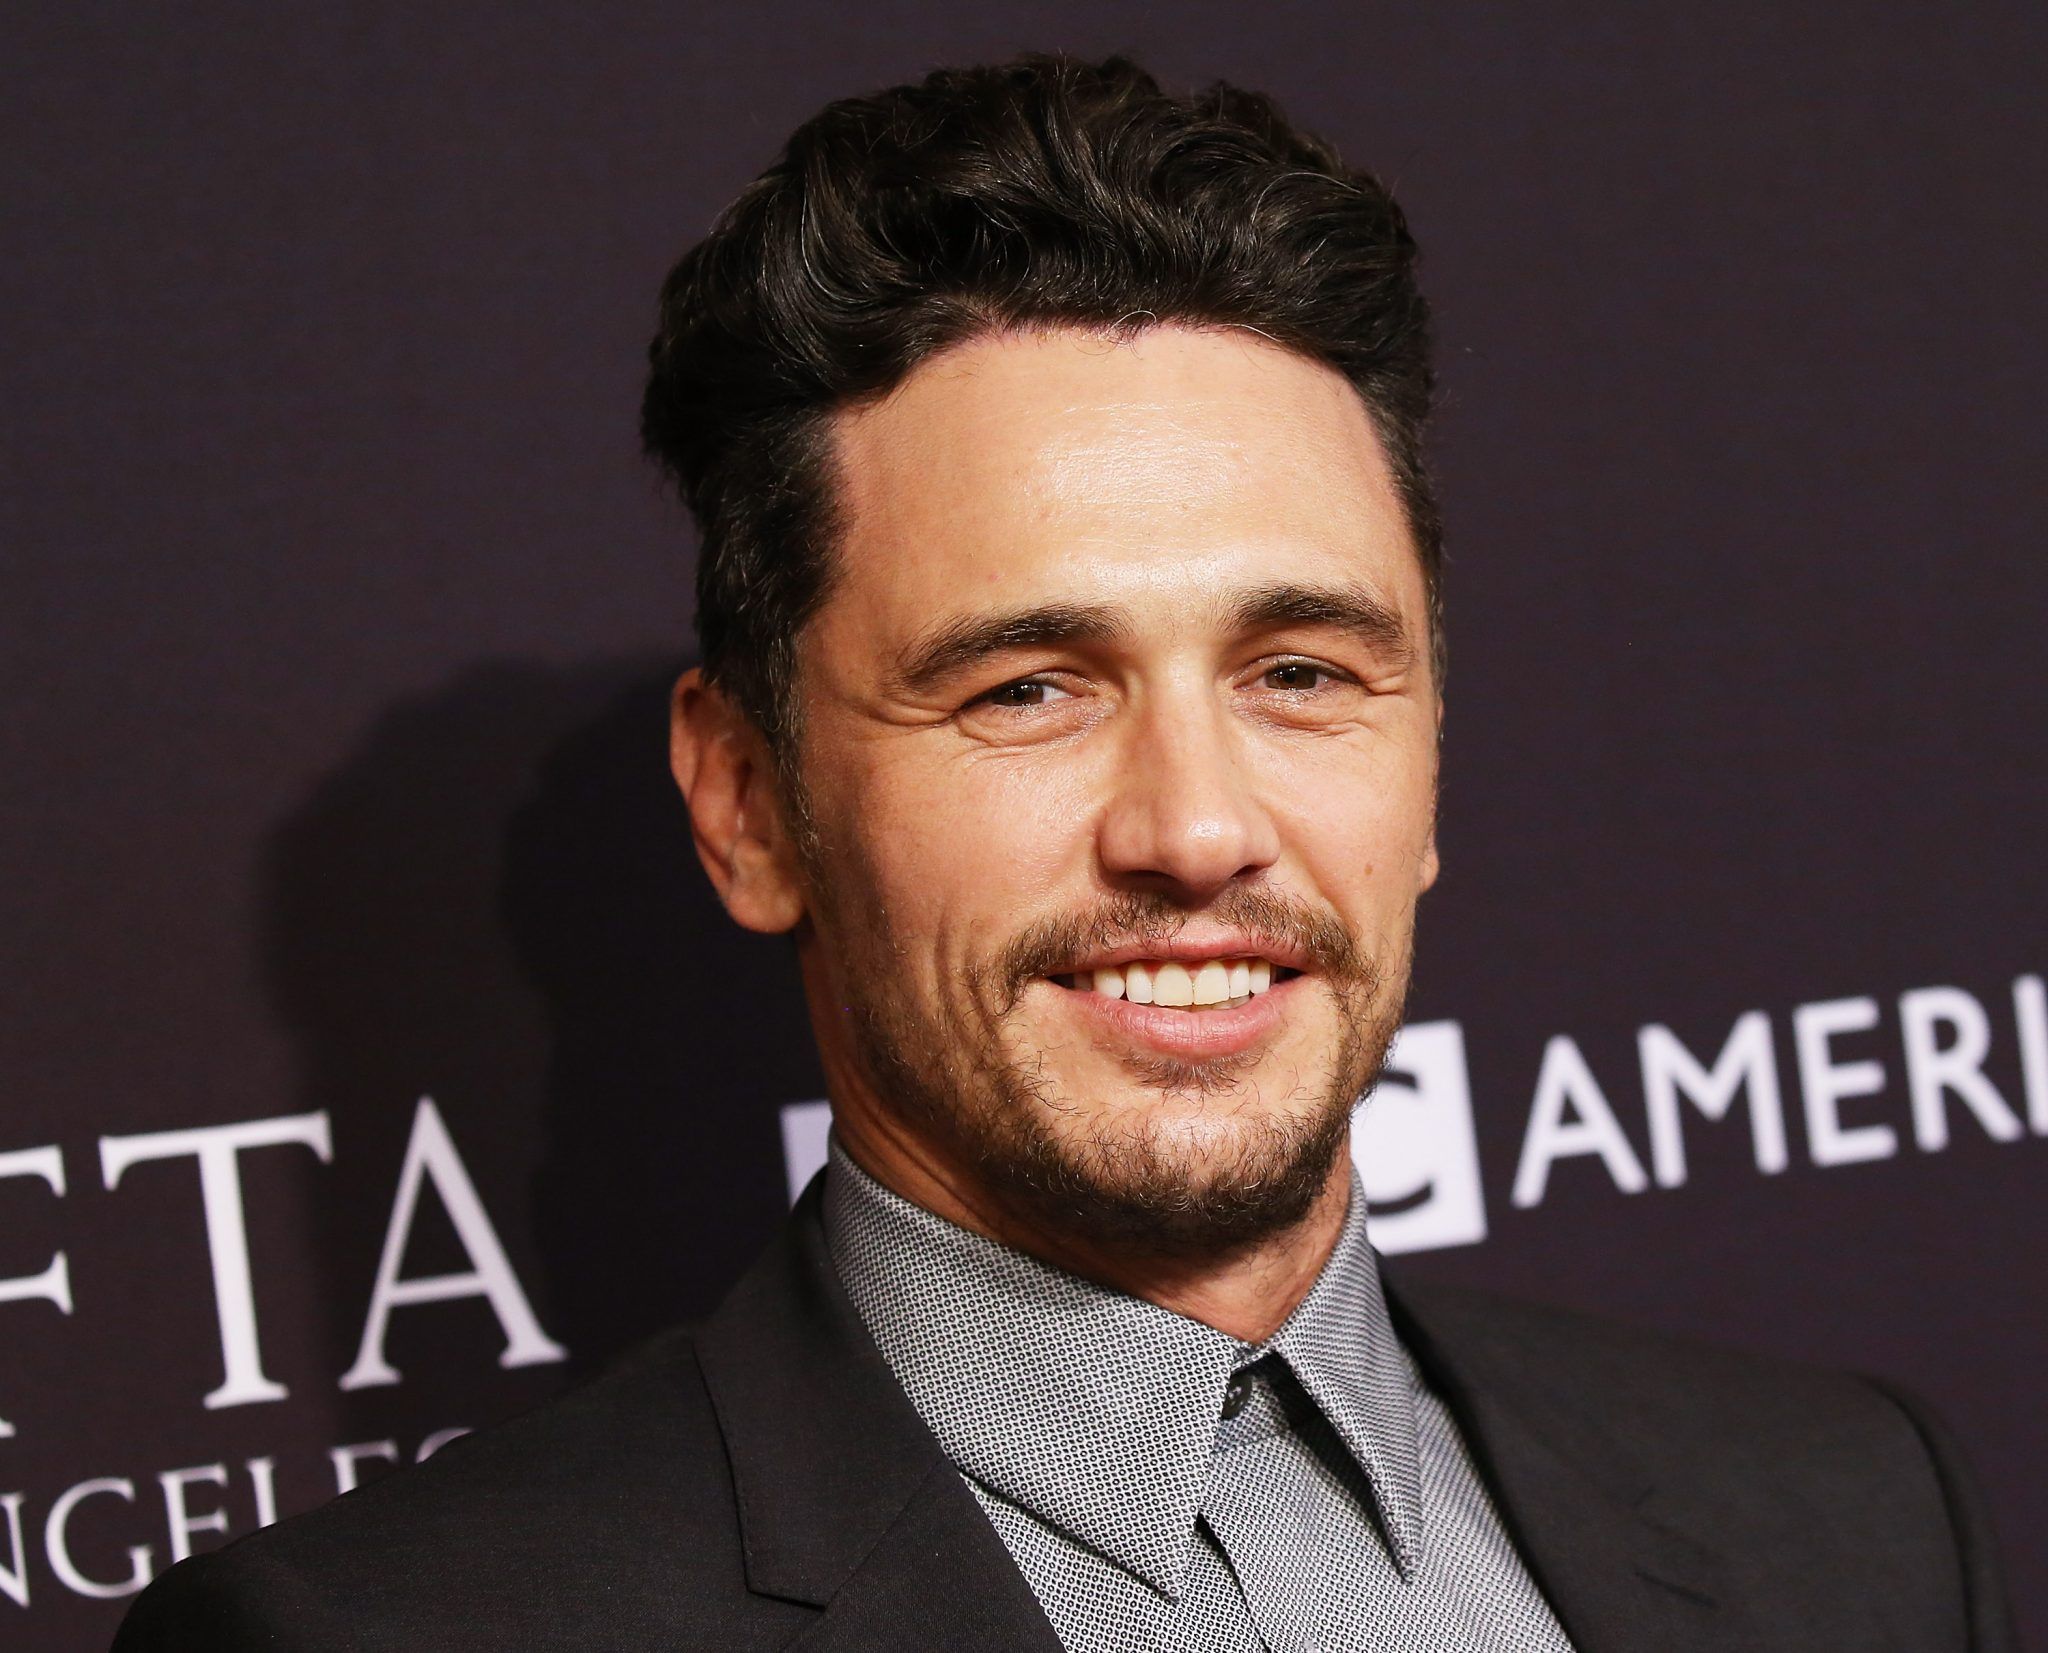 LOS ANGELES, CA - JANUARY 06: James Franco arrives at The BAFTA Los Angeles Tea Party held at Four Seasons Hotel Los Angeles at Beverly Hills on January 6, 2018 in Los Angeles, California. (Photo by Michael Tran/FilmMagic)